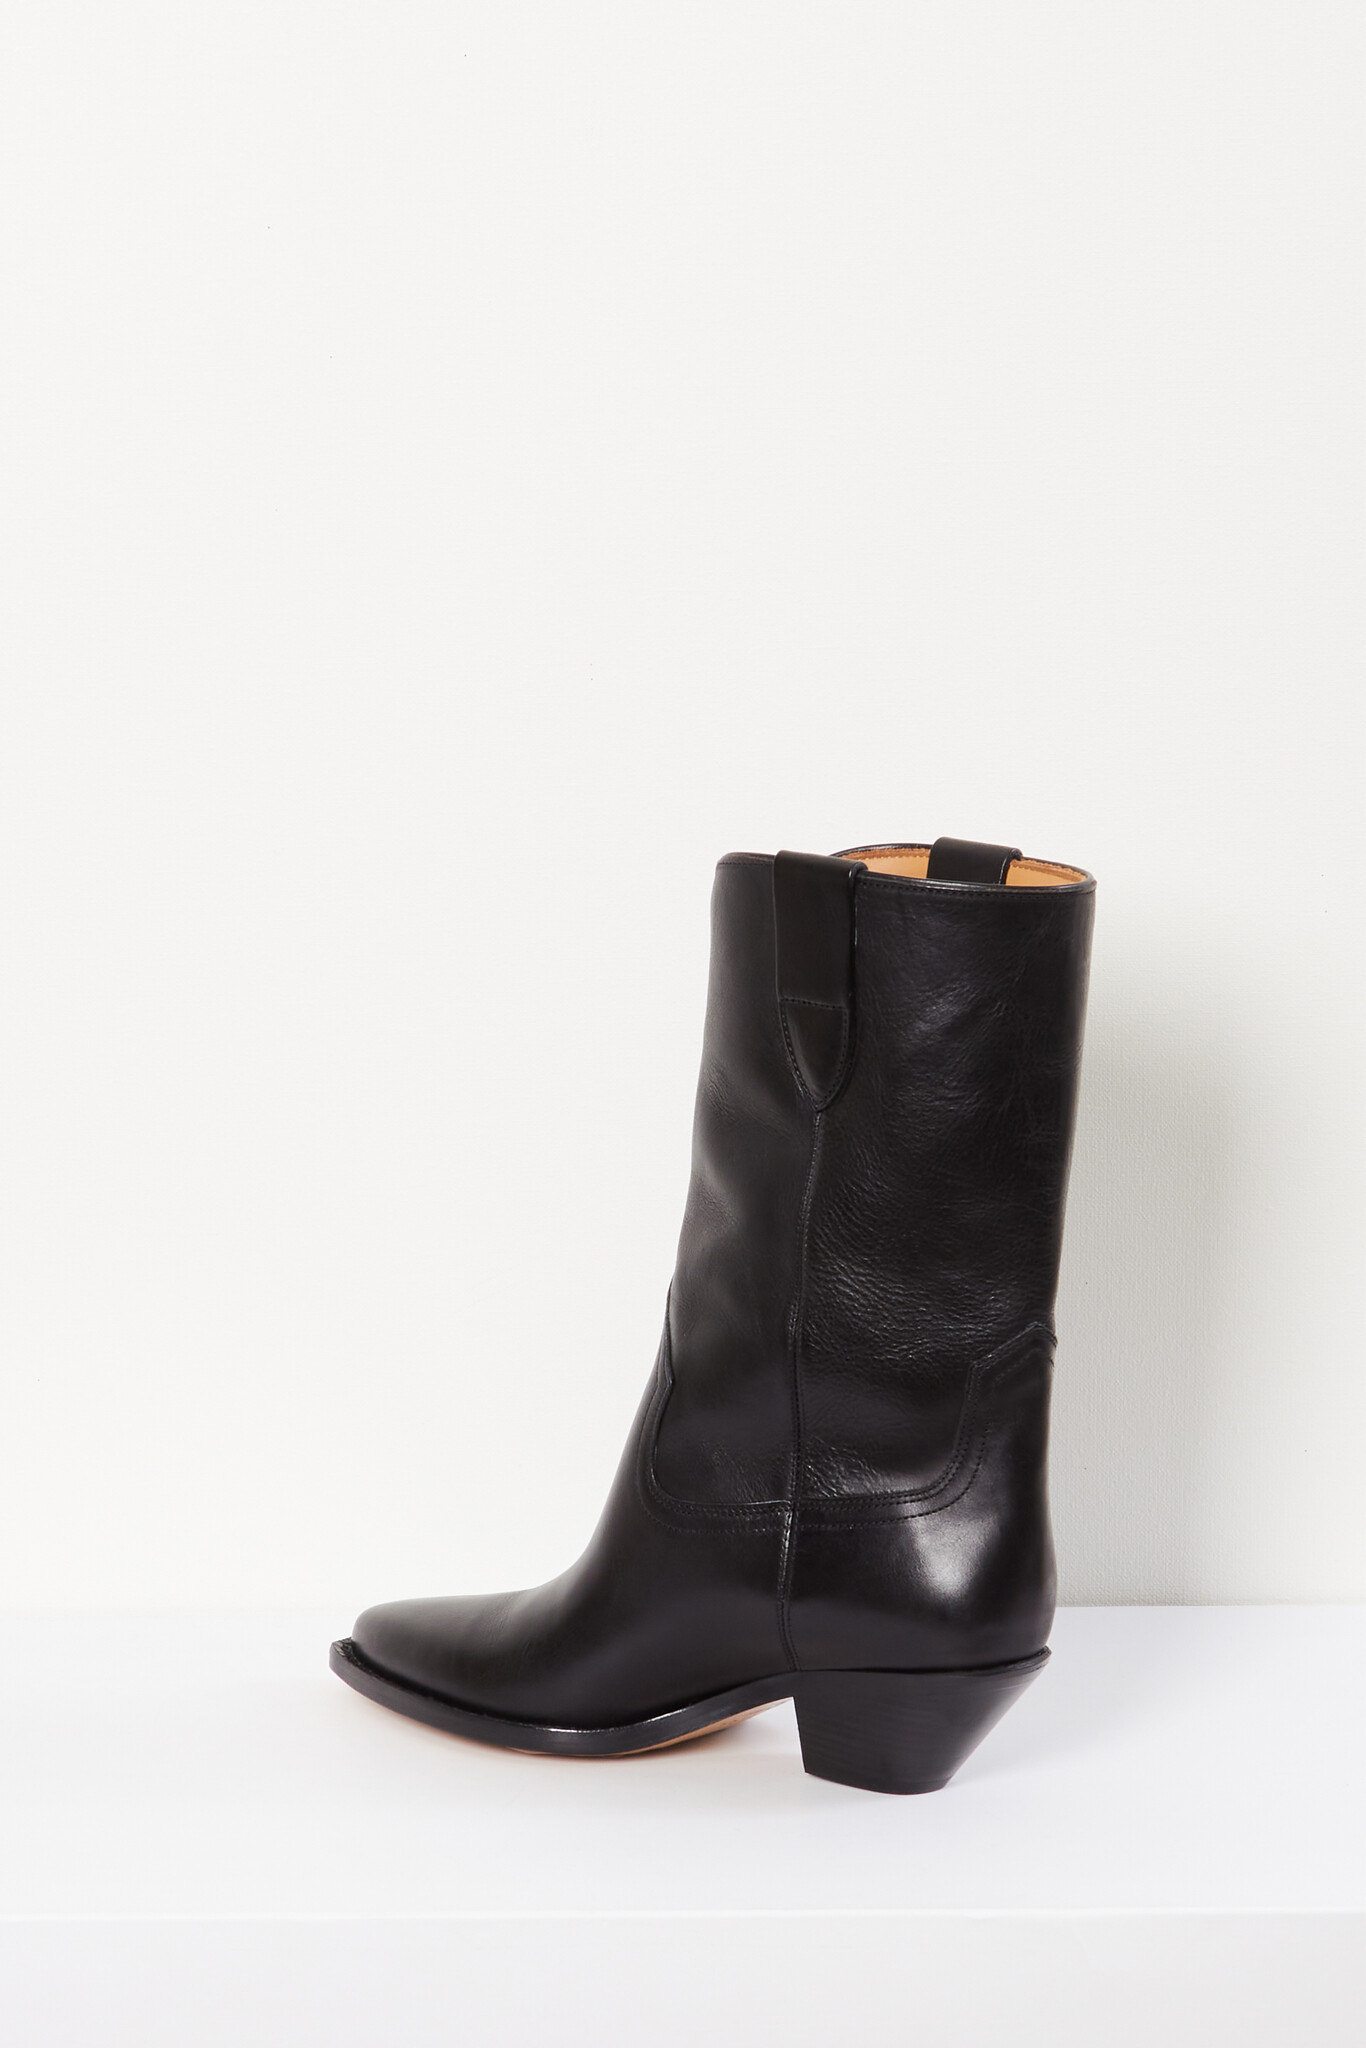 Isabel Marant - Dahope leather boots